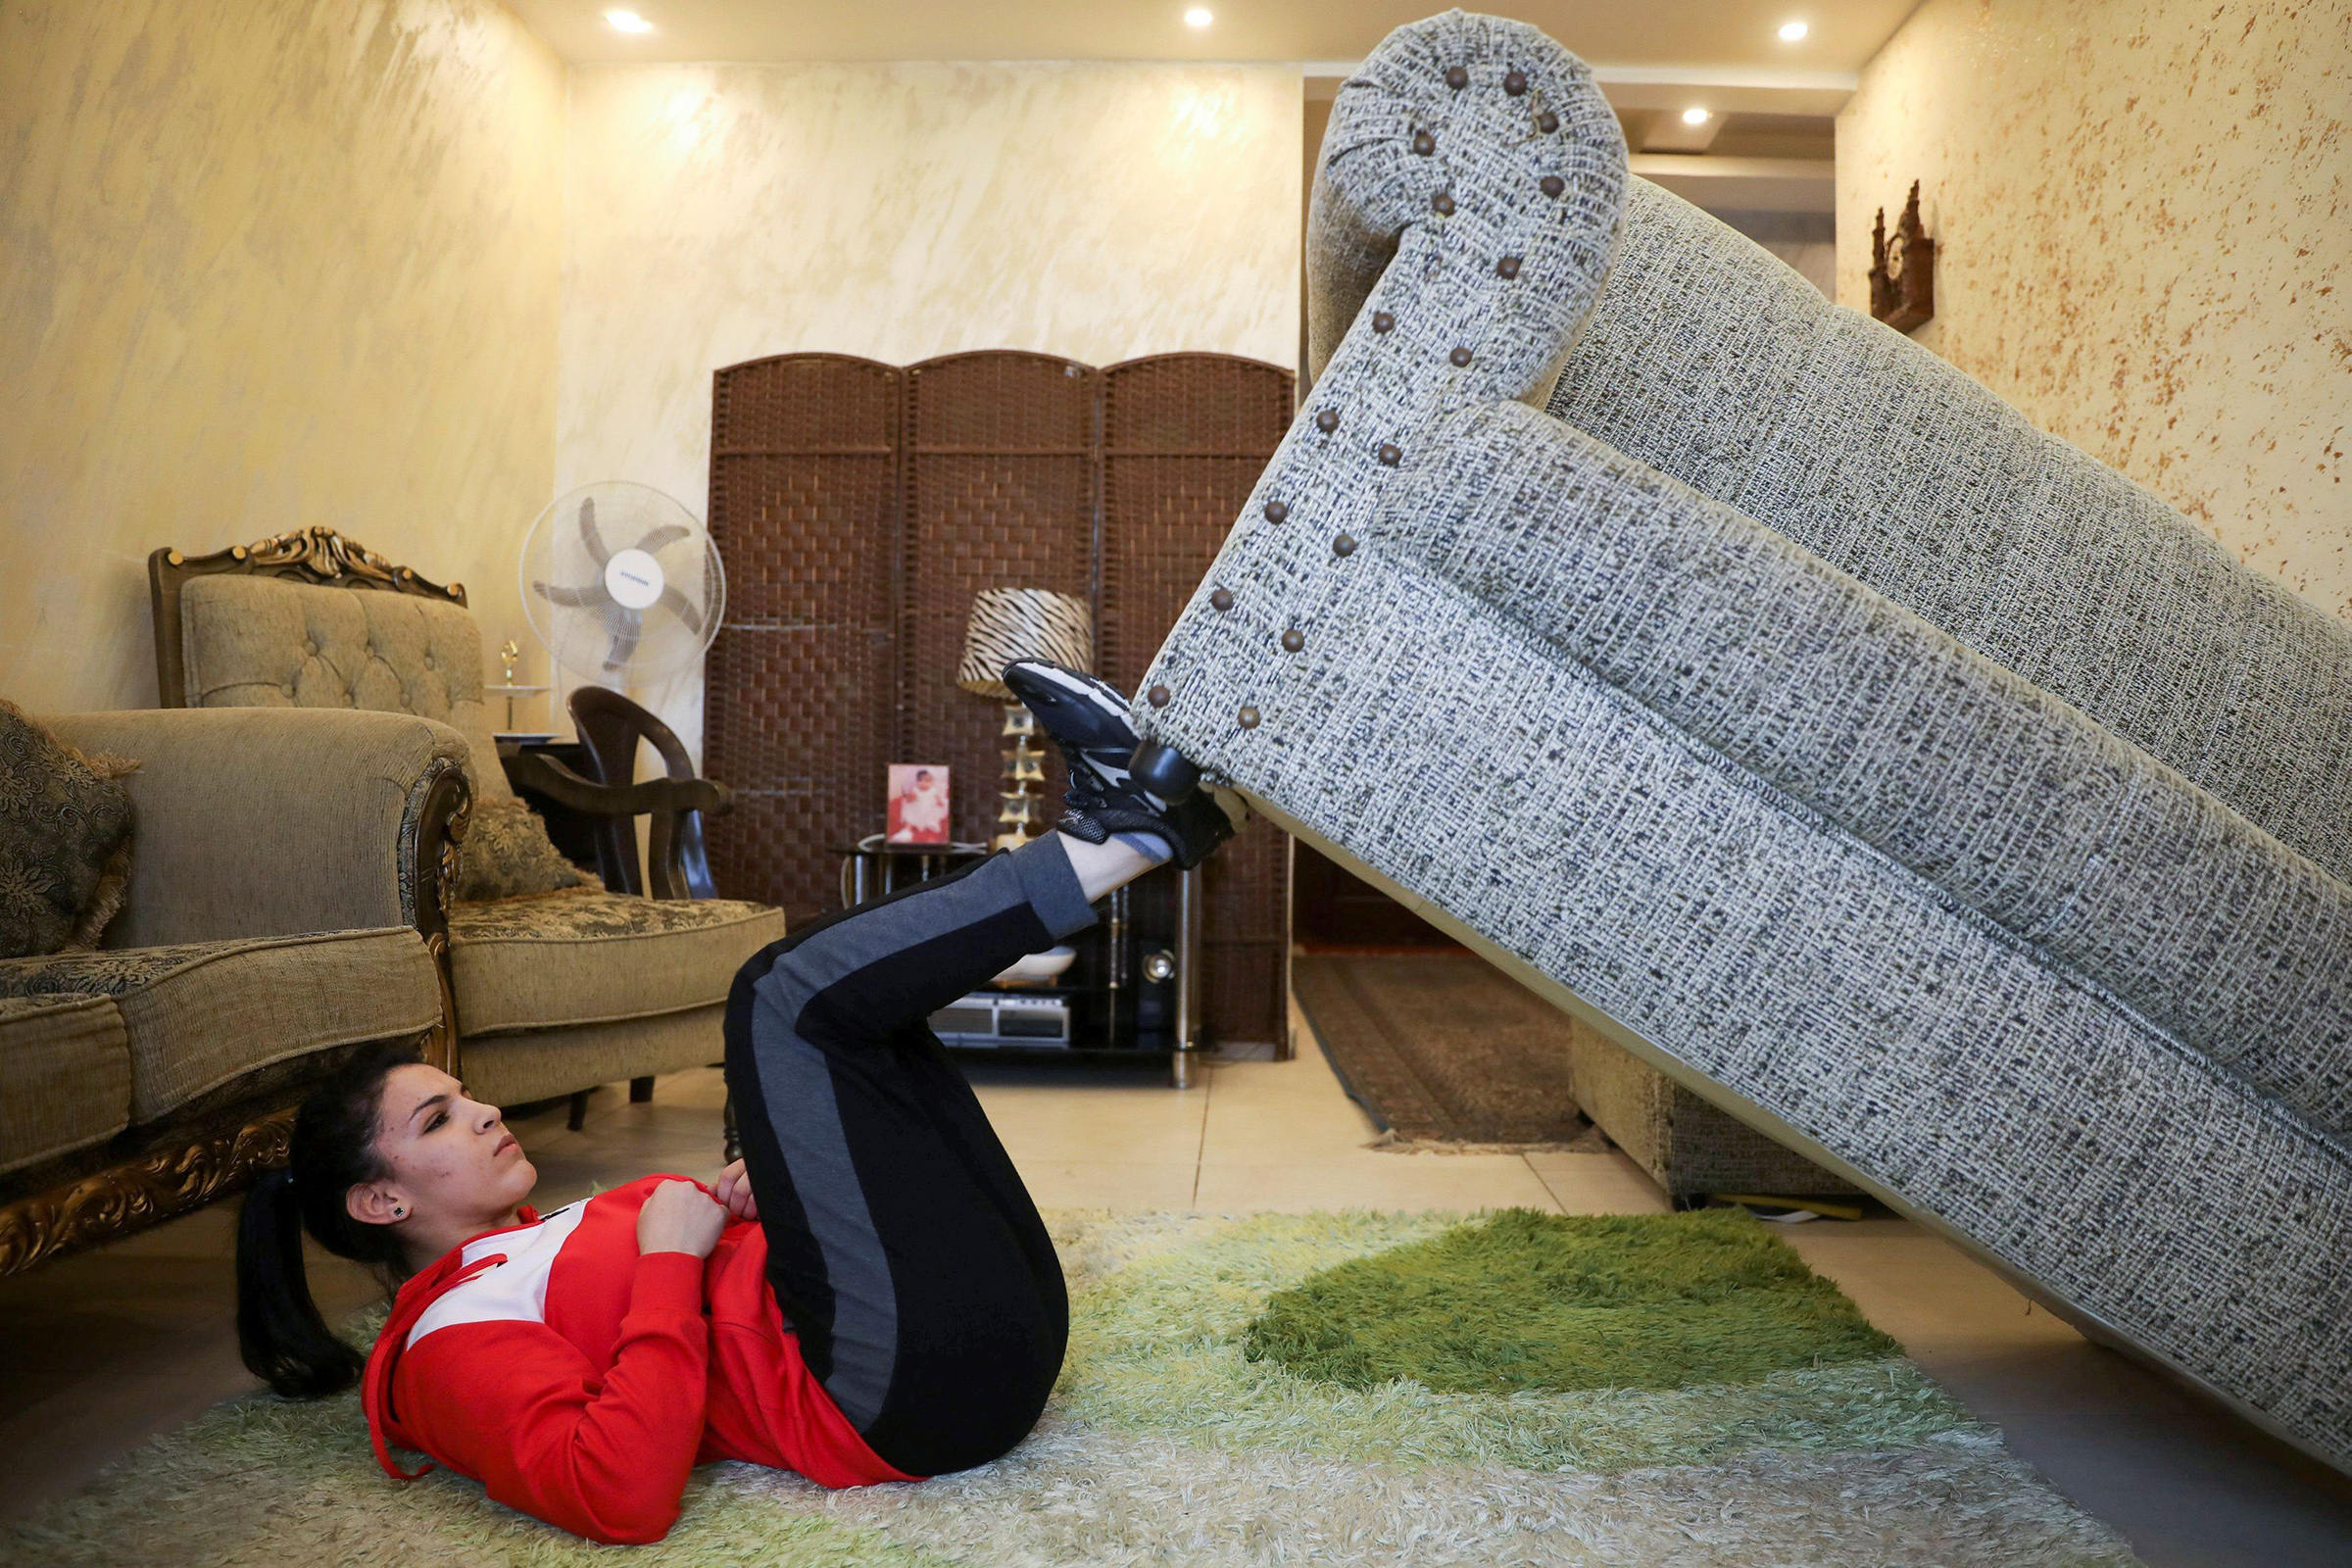 Jordanian judo practitioner Hadeel Alami uses the sofa as a part of her trainings at her home in Amman in April